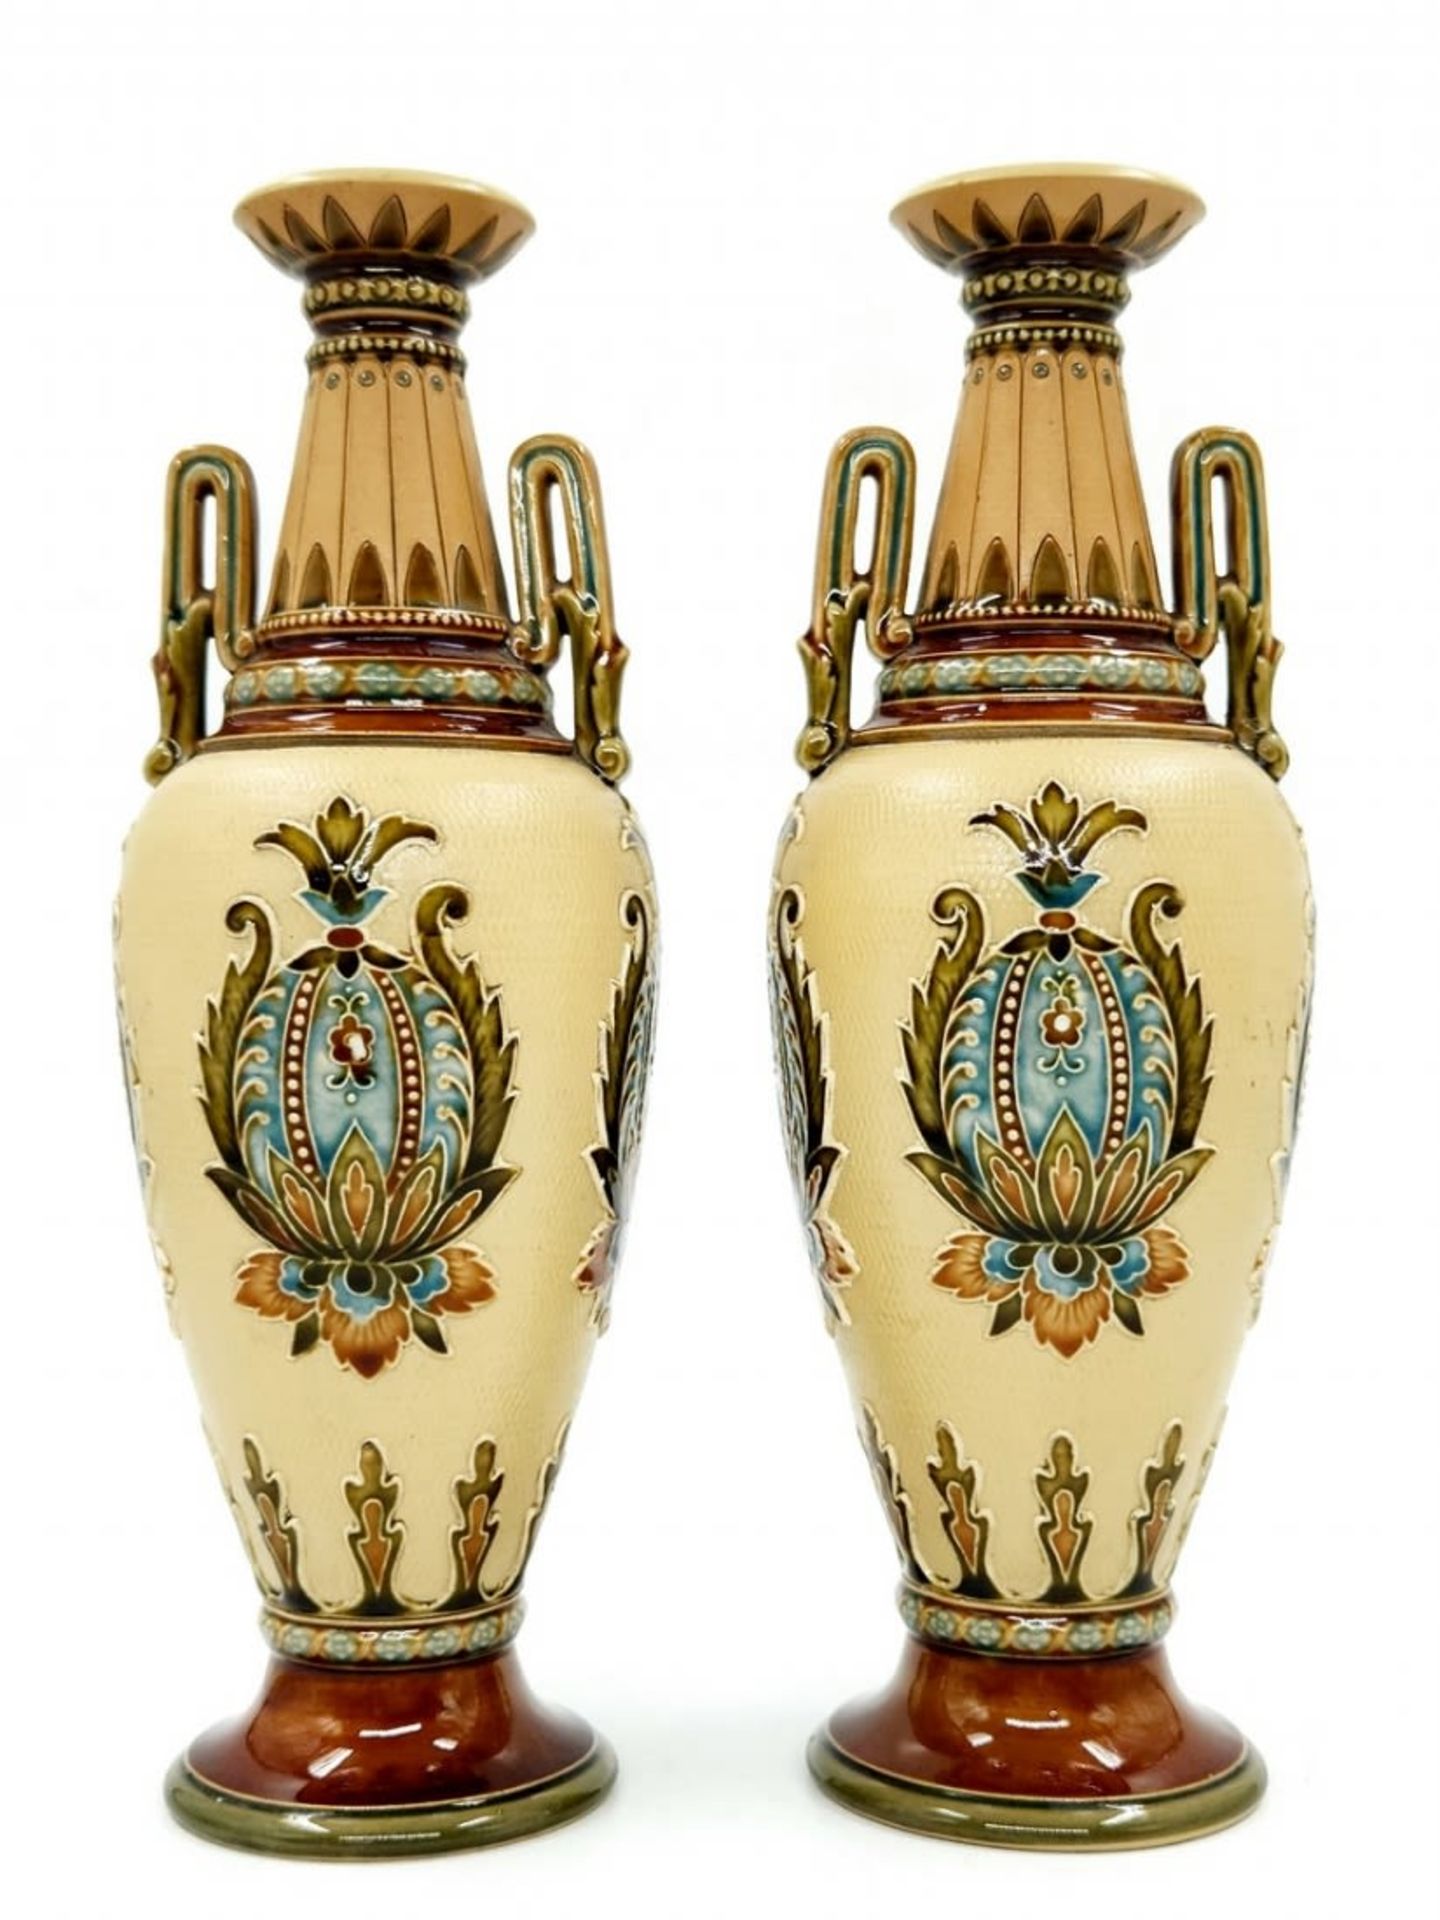 A pair of German vases made by 'Villeroy & Boch, Mettlach', made of majolica, signed, High